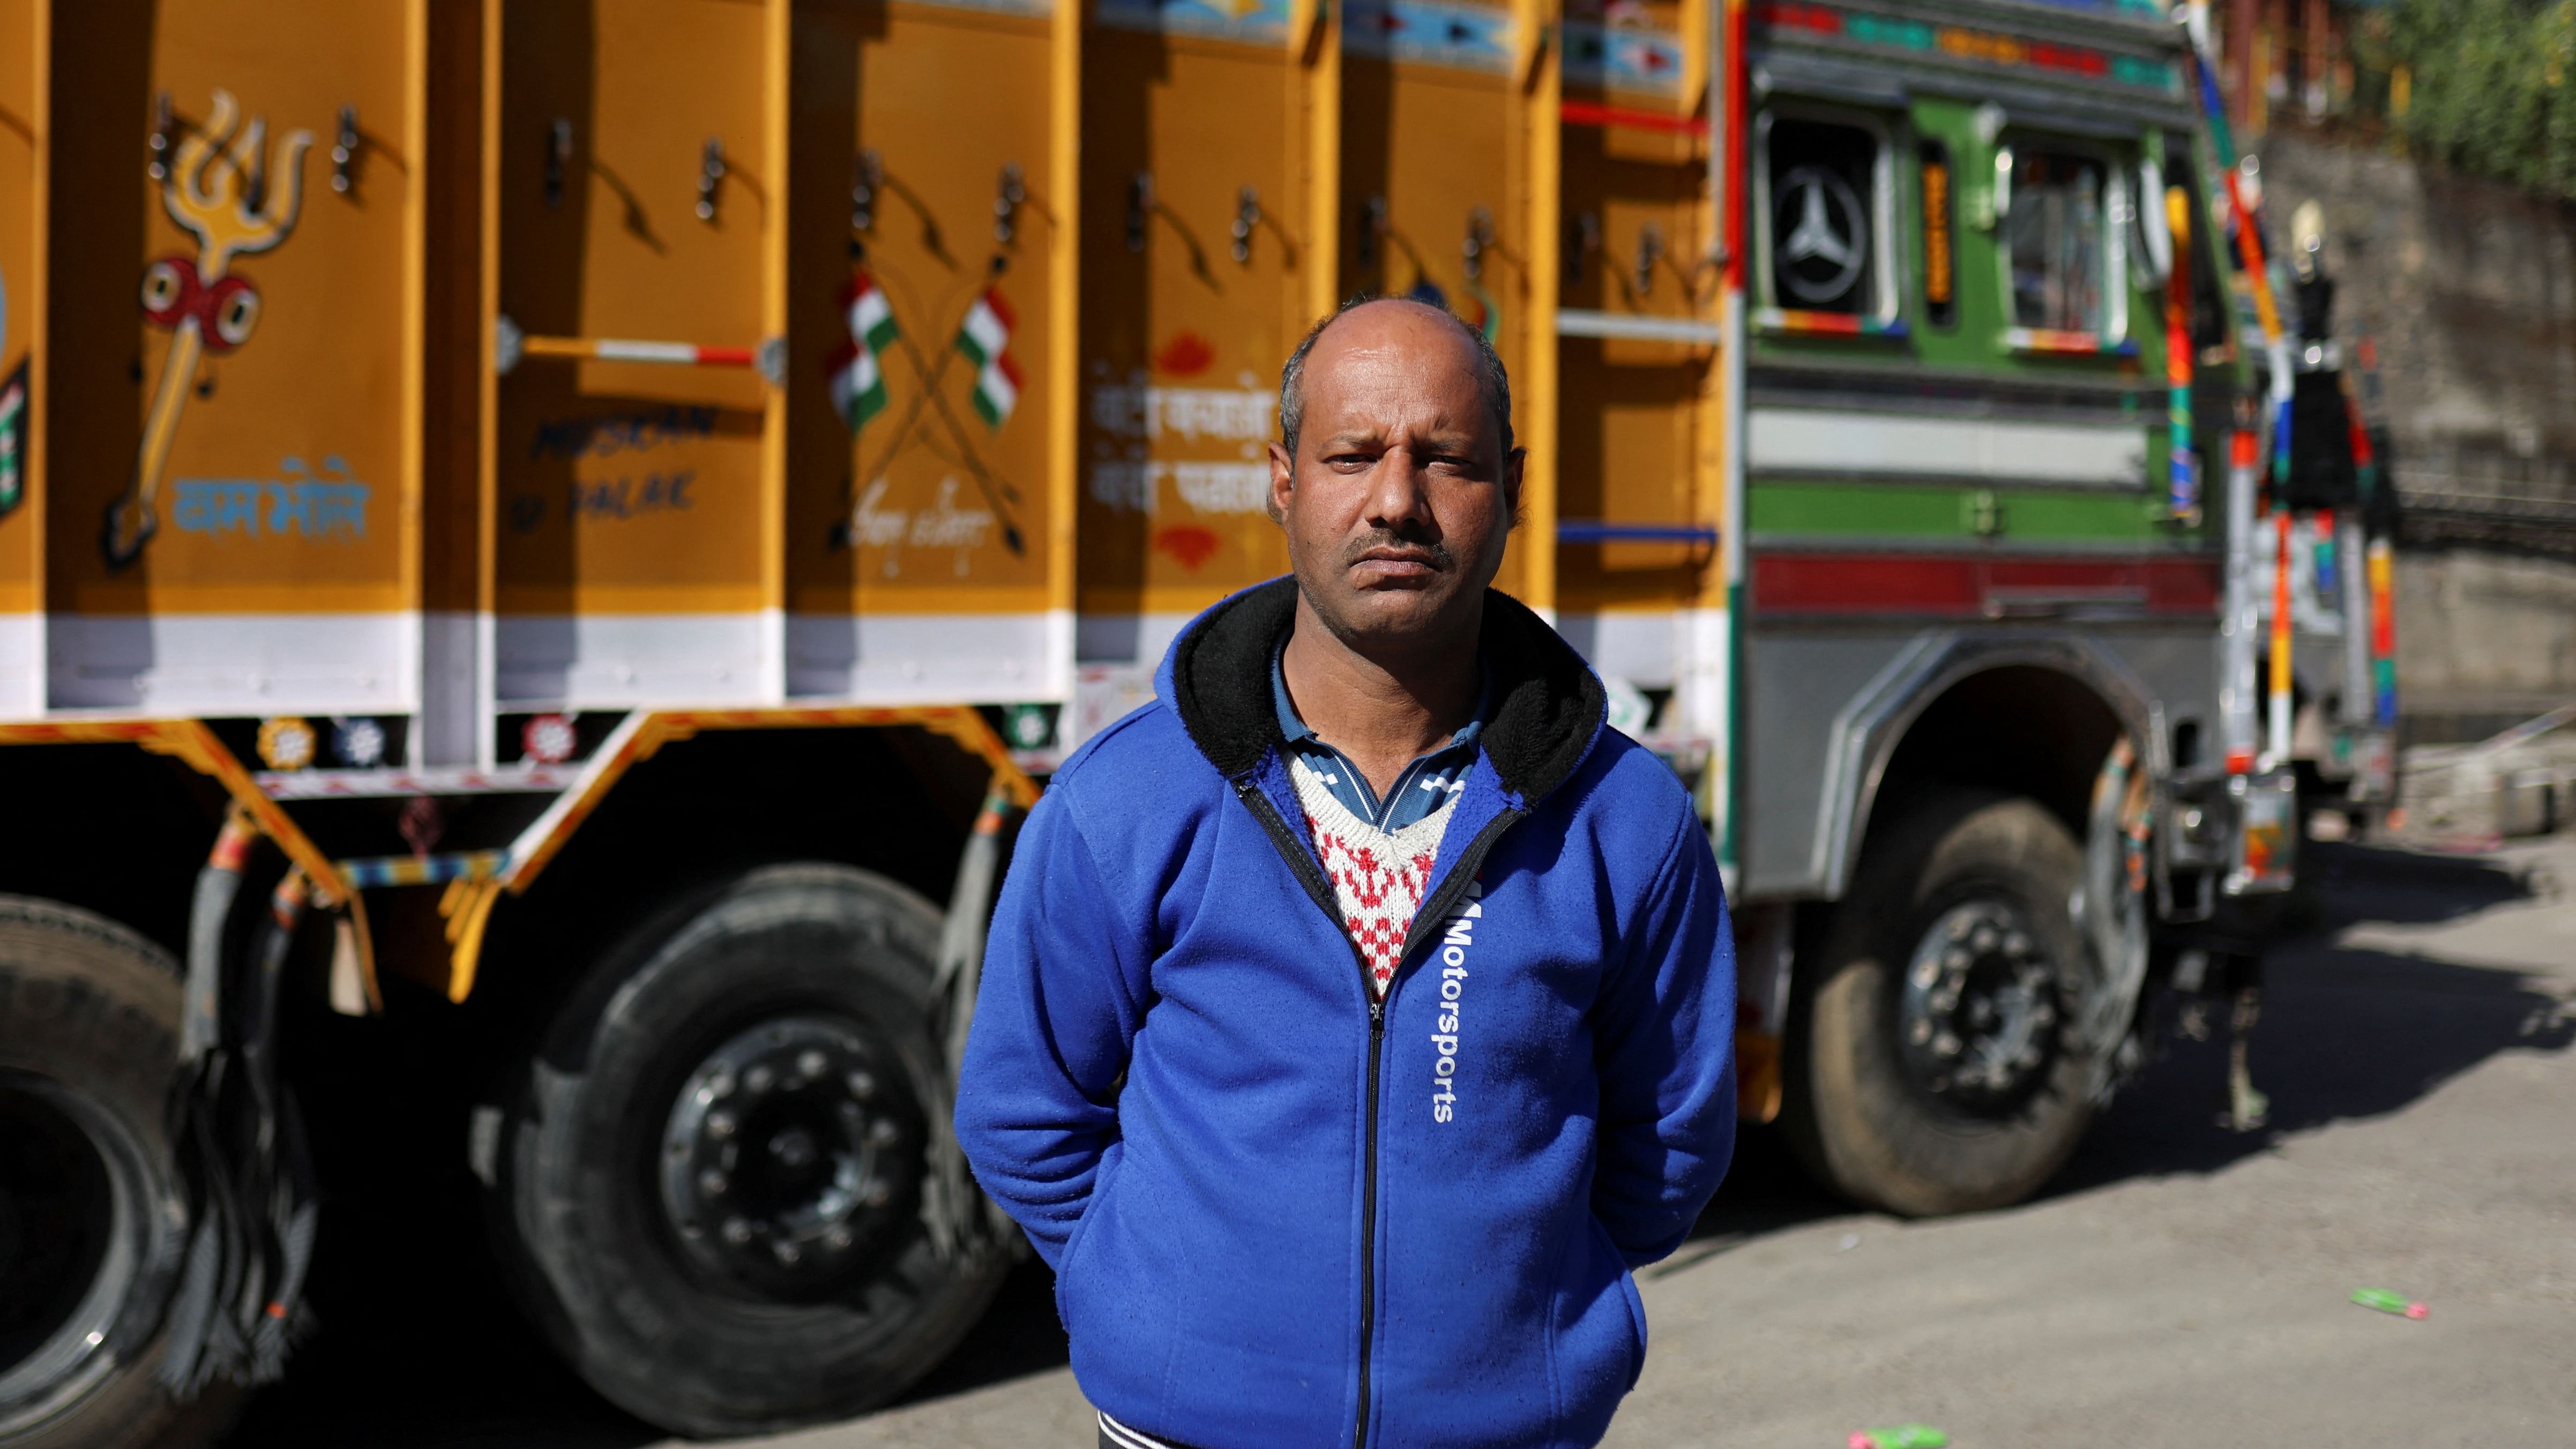 Lokram, a truck owner, poses for a picture near parked trucks next to the Ambuja Cements Limited plant owned by Adani Group in Darlaghat, Solan district in the state of Himachal Pradesh, India. Credit: Reuters Photo